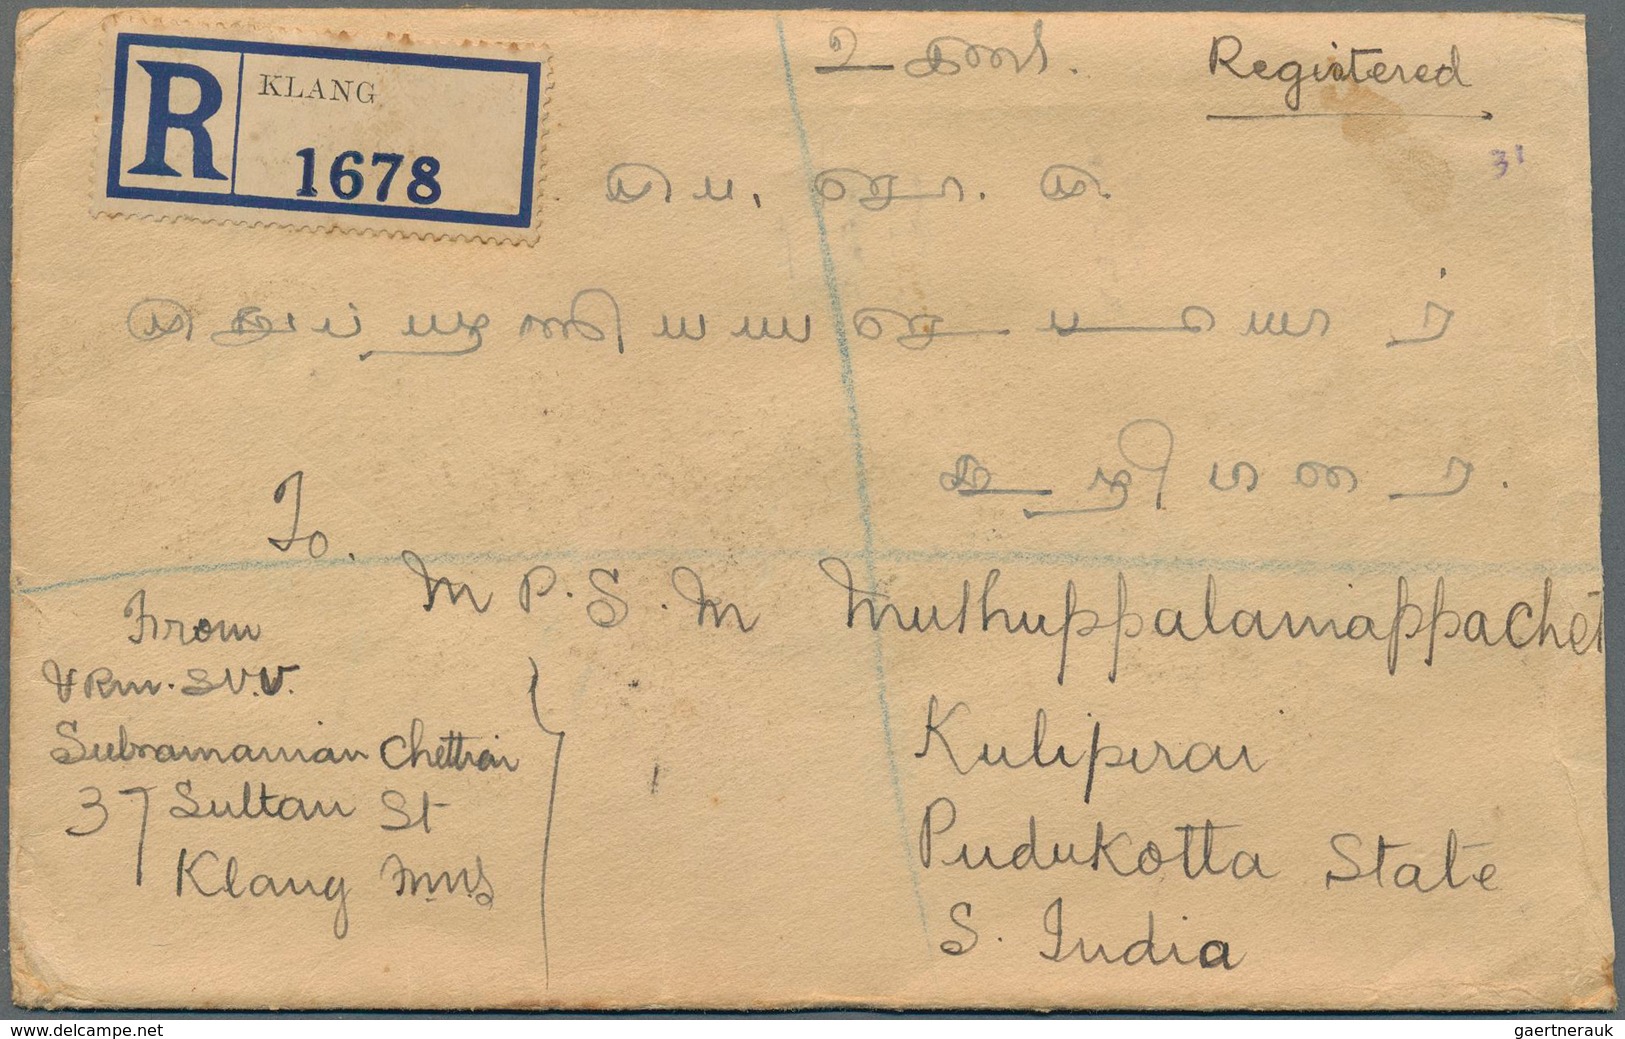 Malaiische Staaten - Selangor: 1938-39, Four registered covers from Klang (3) and Kuala Lumpur to In